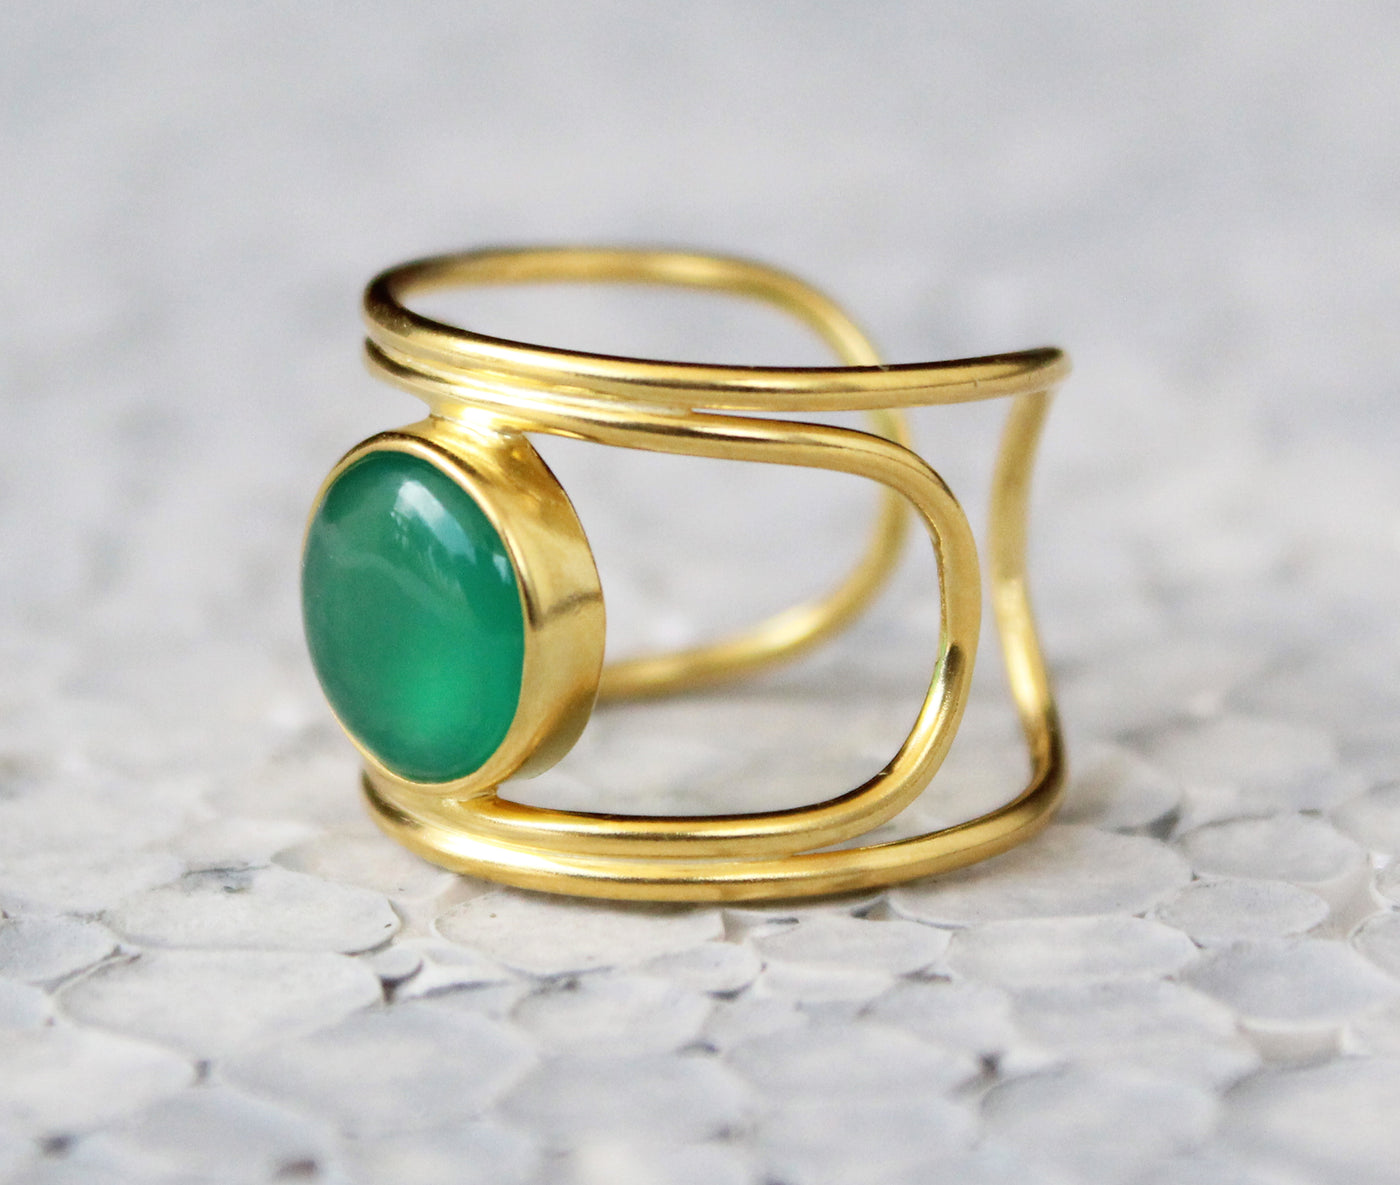 Green Onyx Ring, 925 solid sterling silver ring, Onyx Ring, Rings for Women, Sterling Silver Ring, Modern Ring, Gold filled Ring